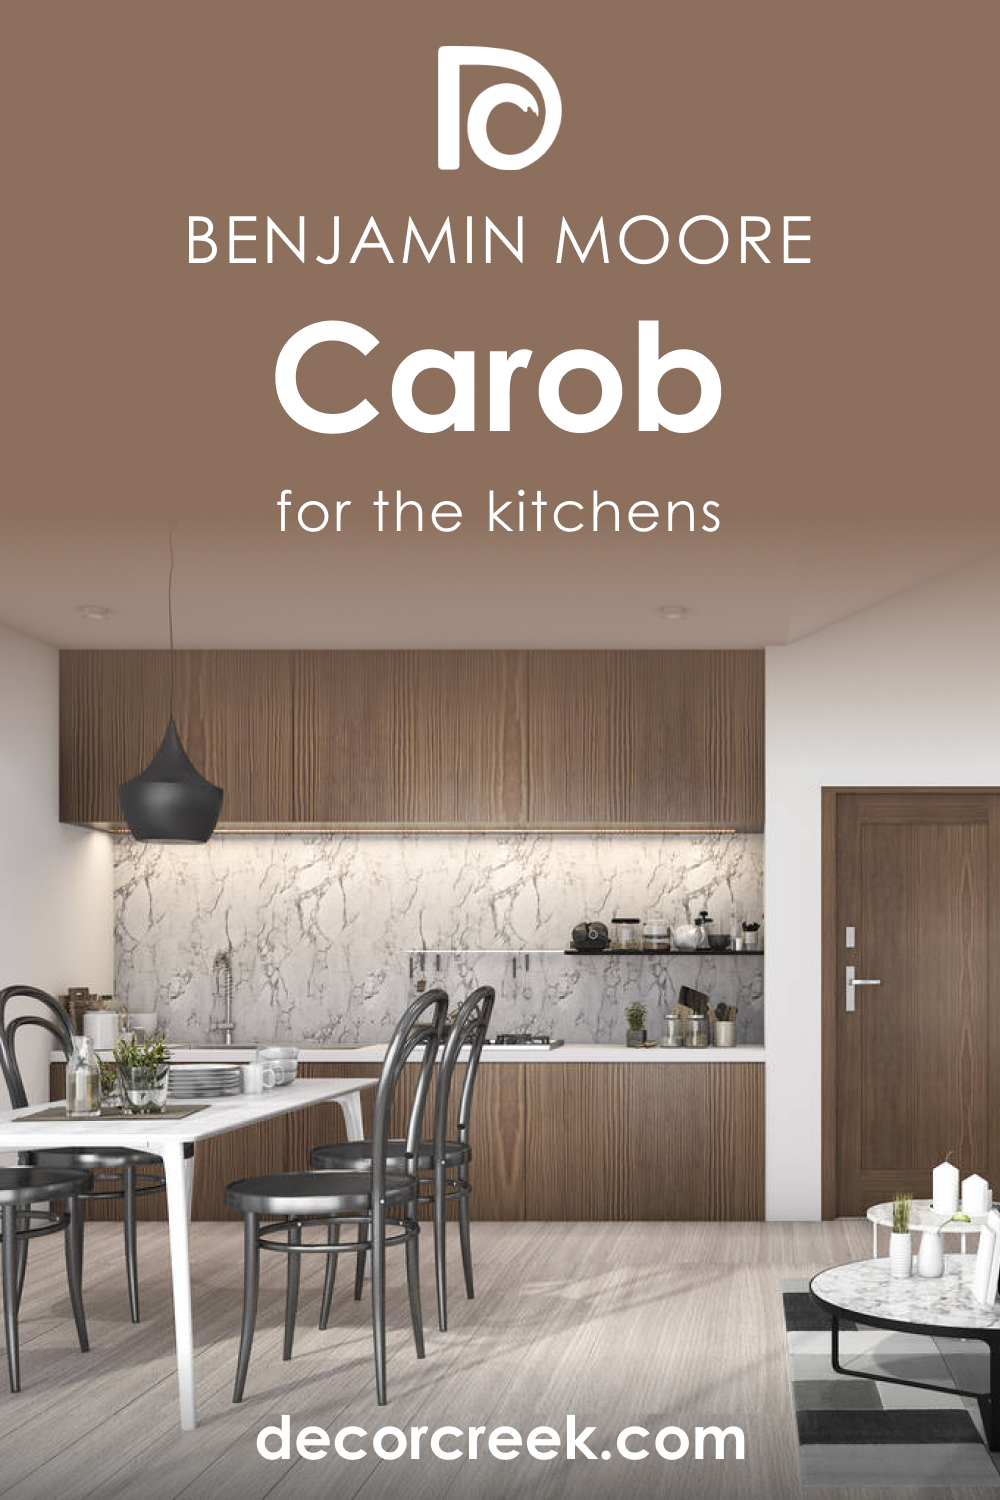 How to Use Carob AF-160 in the Kitchen?